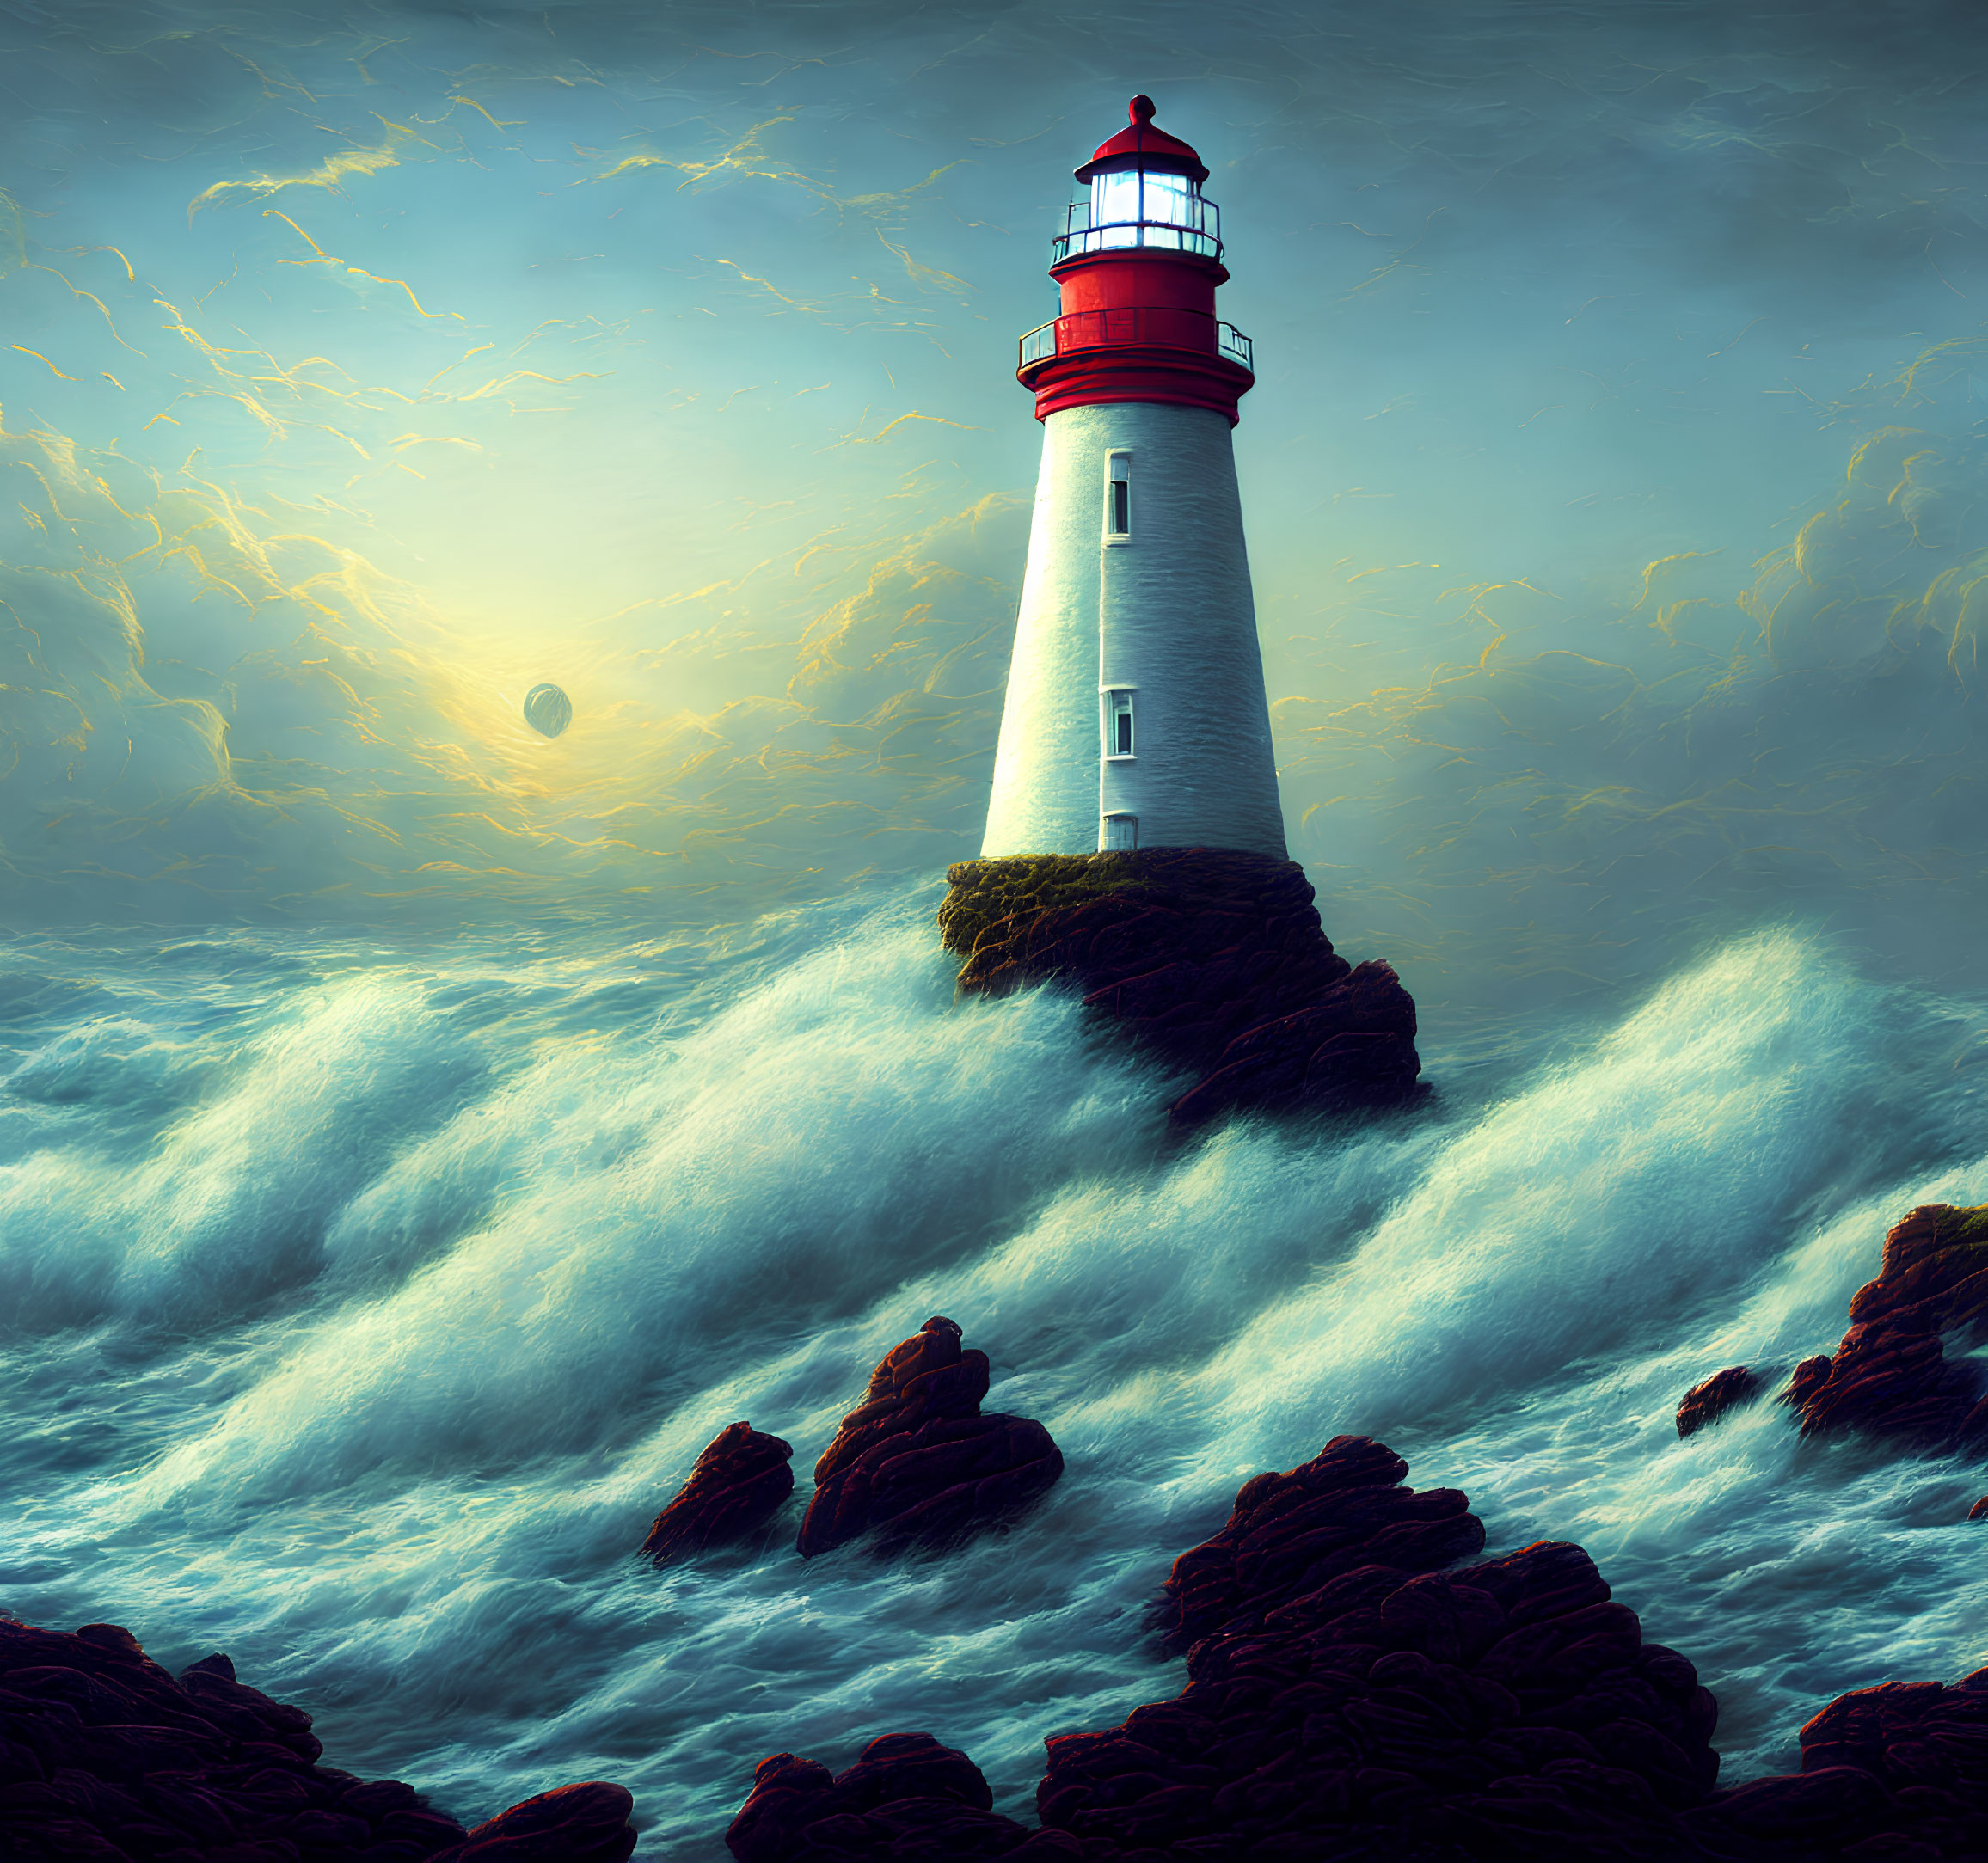 Picturesque lighthouse on rugged cliff amid crashing waves and dramatic sky